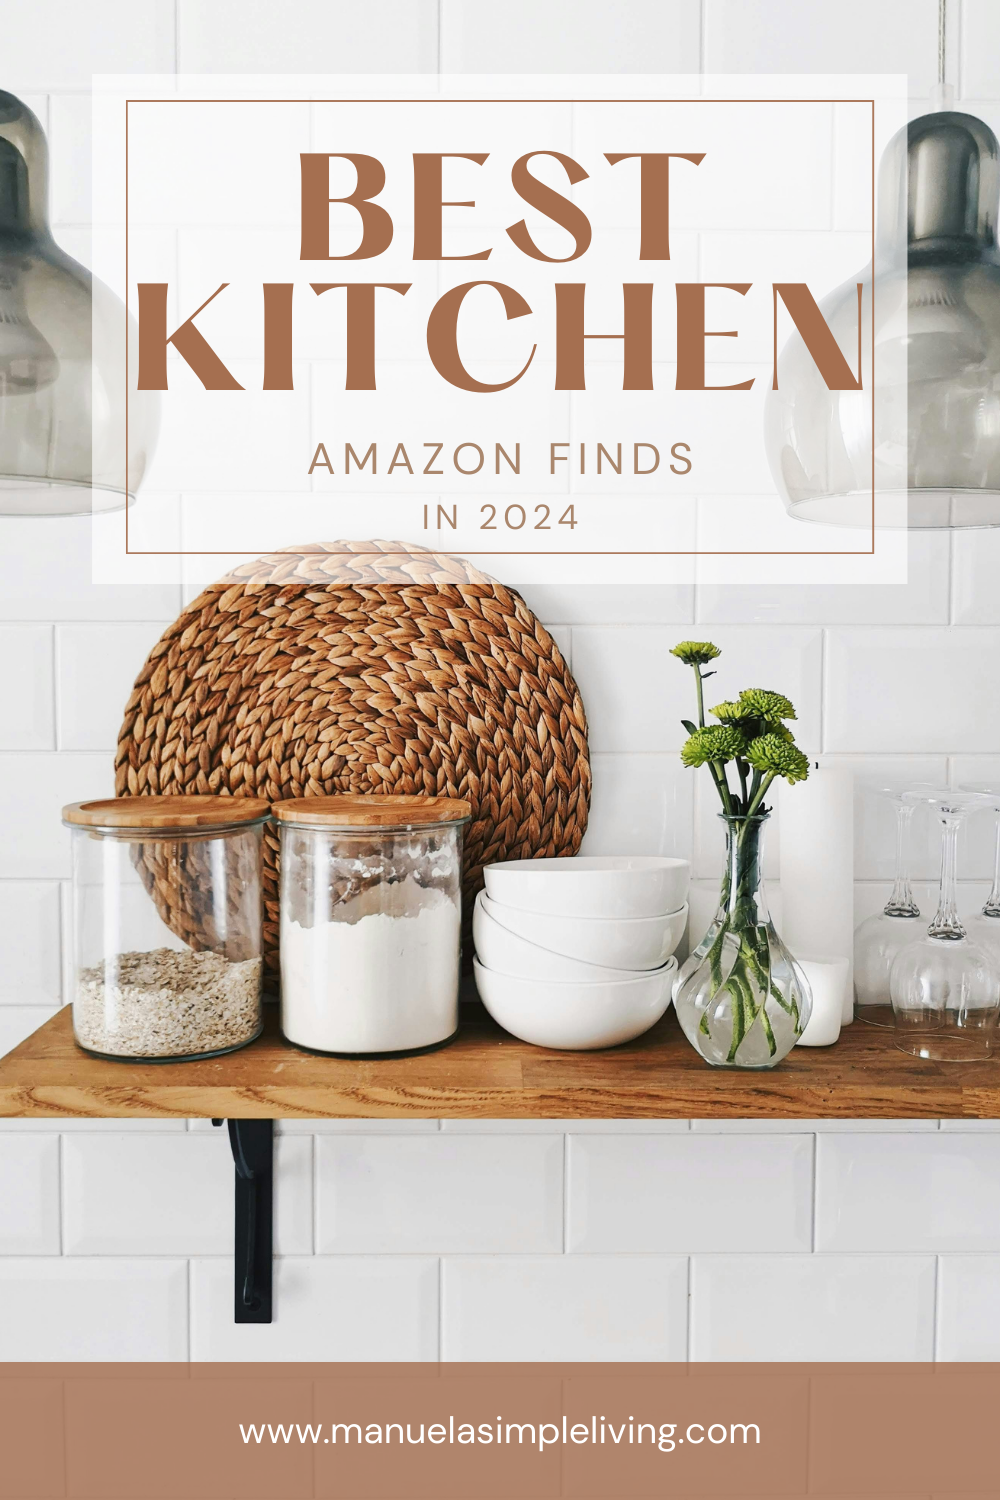 You are currently viewing 11 Best Kitchen Amazon Finds in 2024